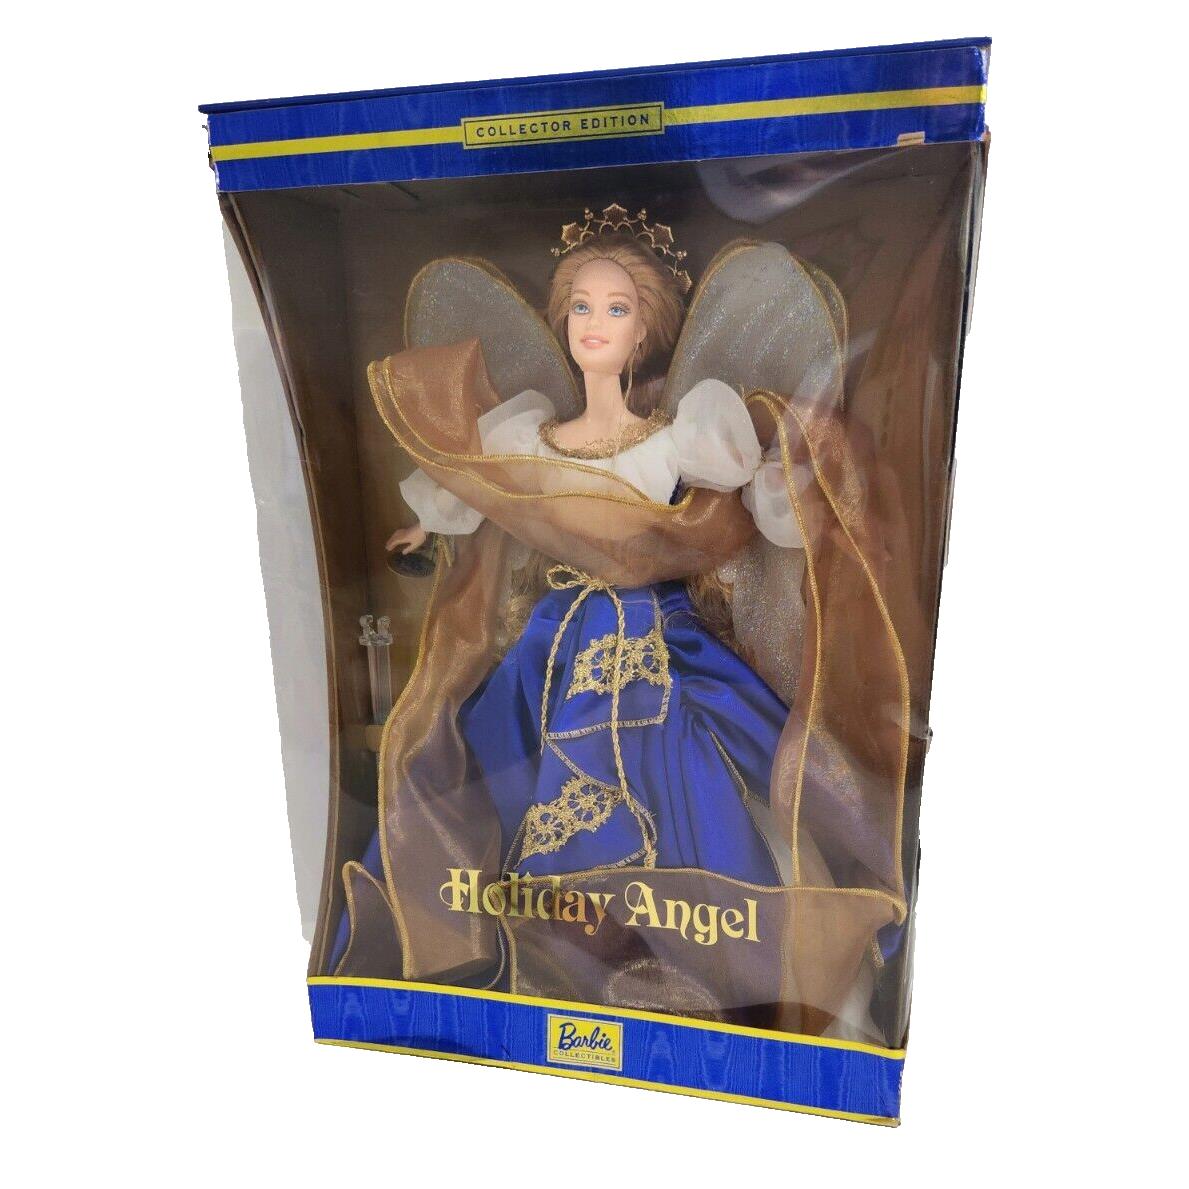 Vintage Holiday Angel Barbie Doll Collector Edition 2000 Read